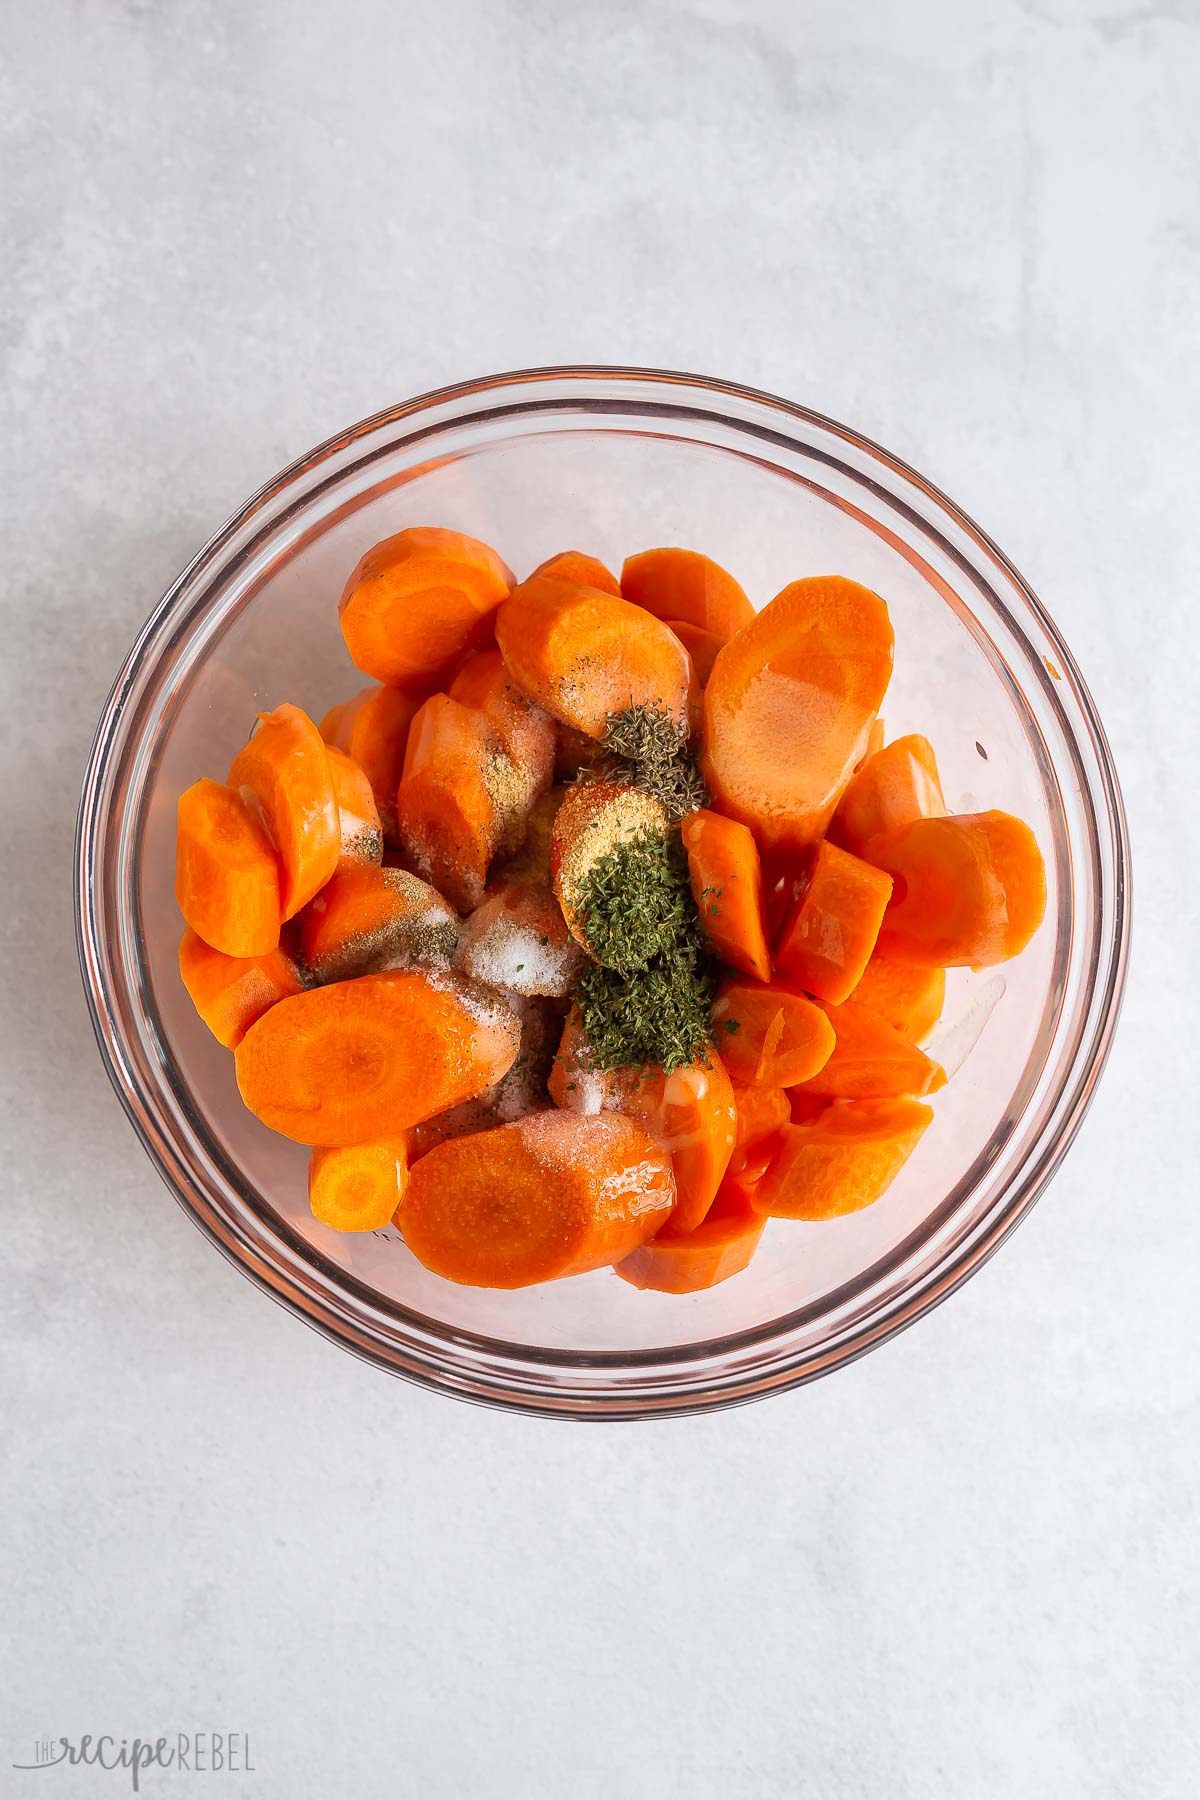 ingredients for roasted carrots in glass bowl.